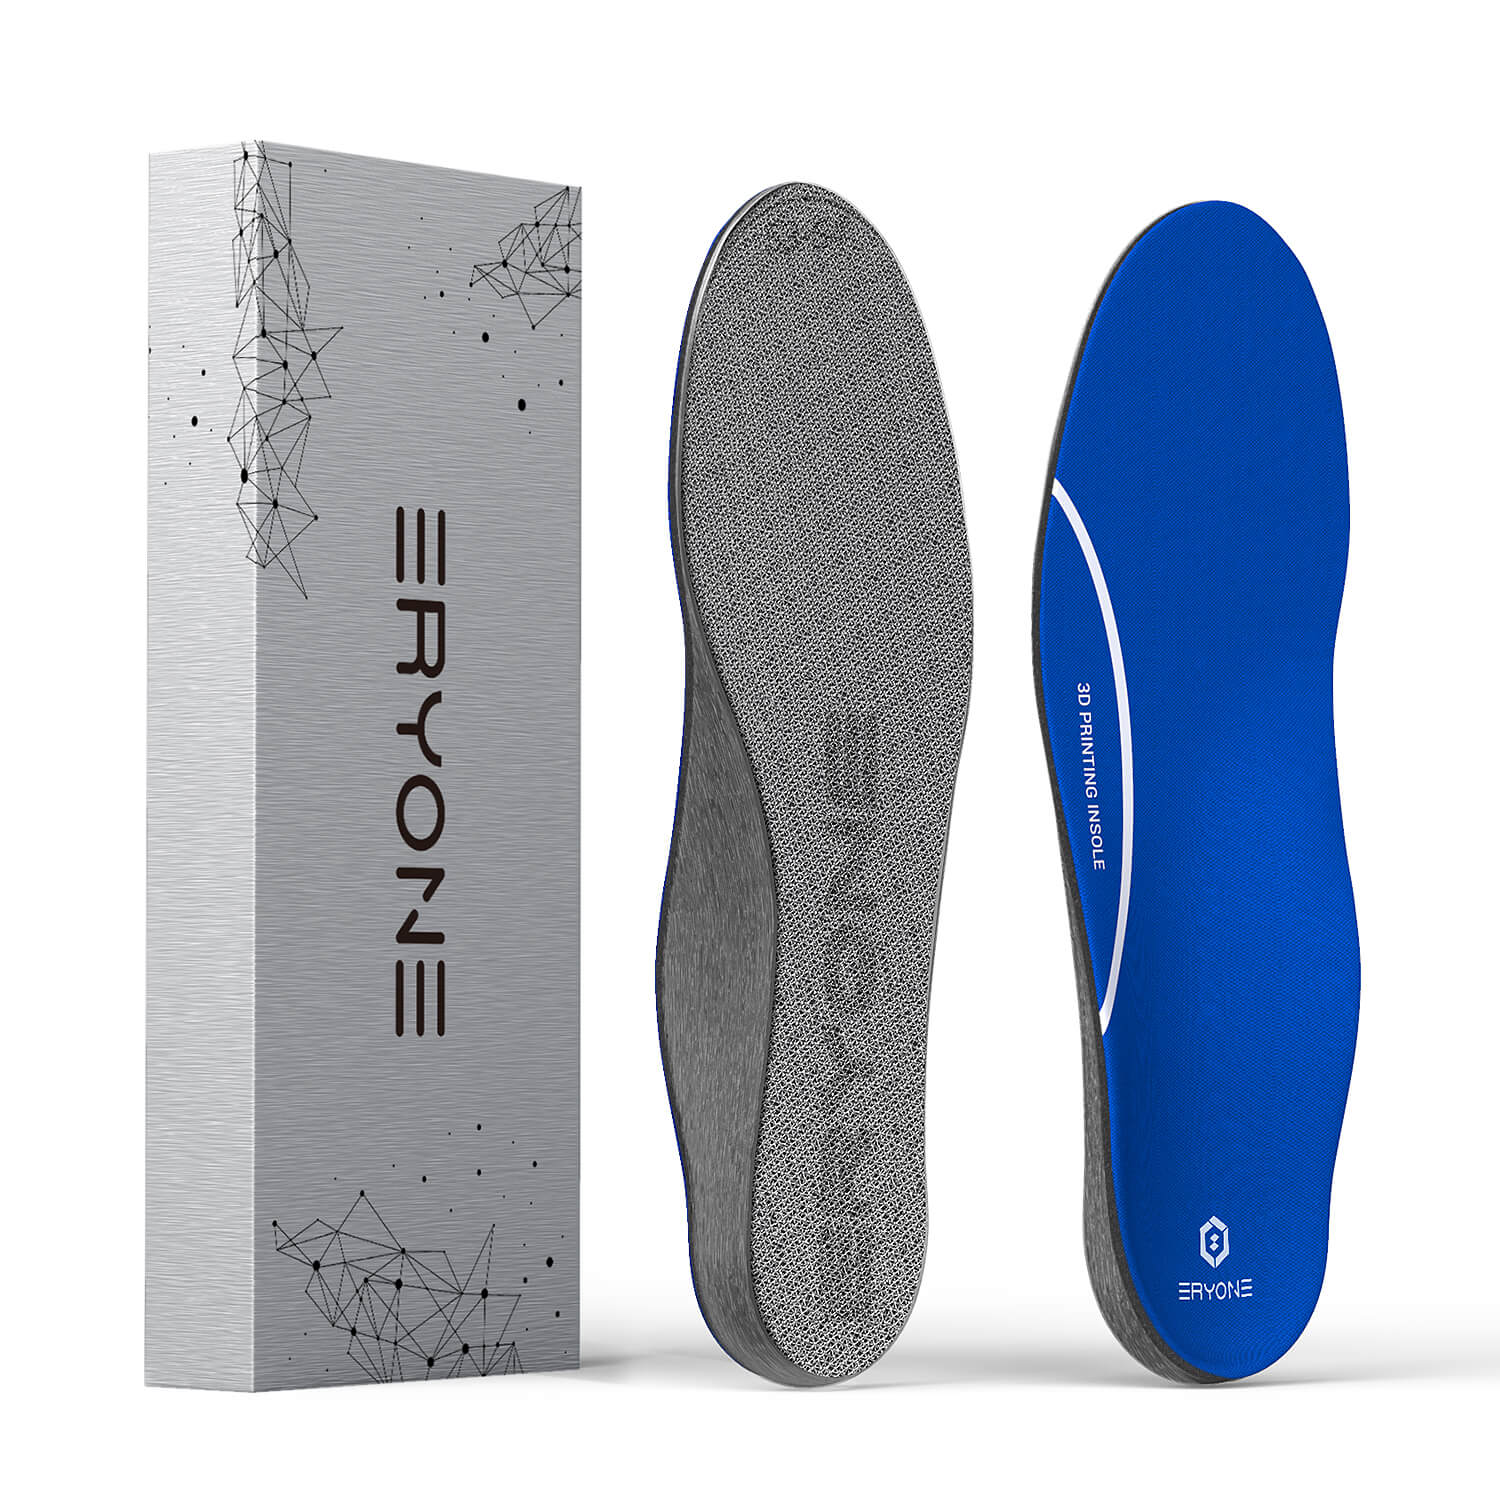 ERYONE Arch Support Insoles & Inserts - 3D Printed Orthotics Inserts for Men & Women Relief Foot Pain Flat Feet Sports Shock Absorption - Plantar Fasciitis Insoles for Running Walking Hiking